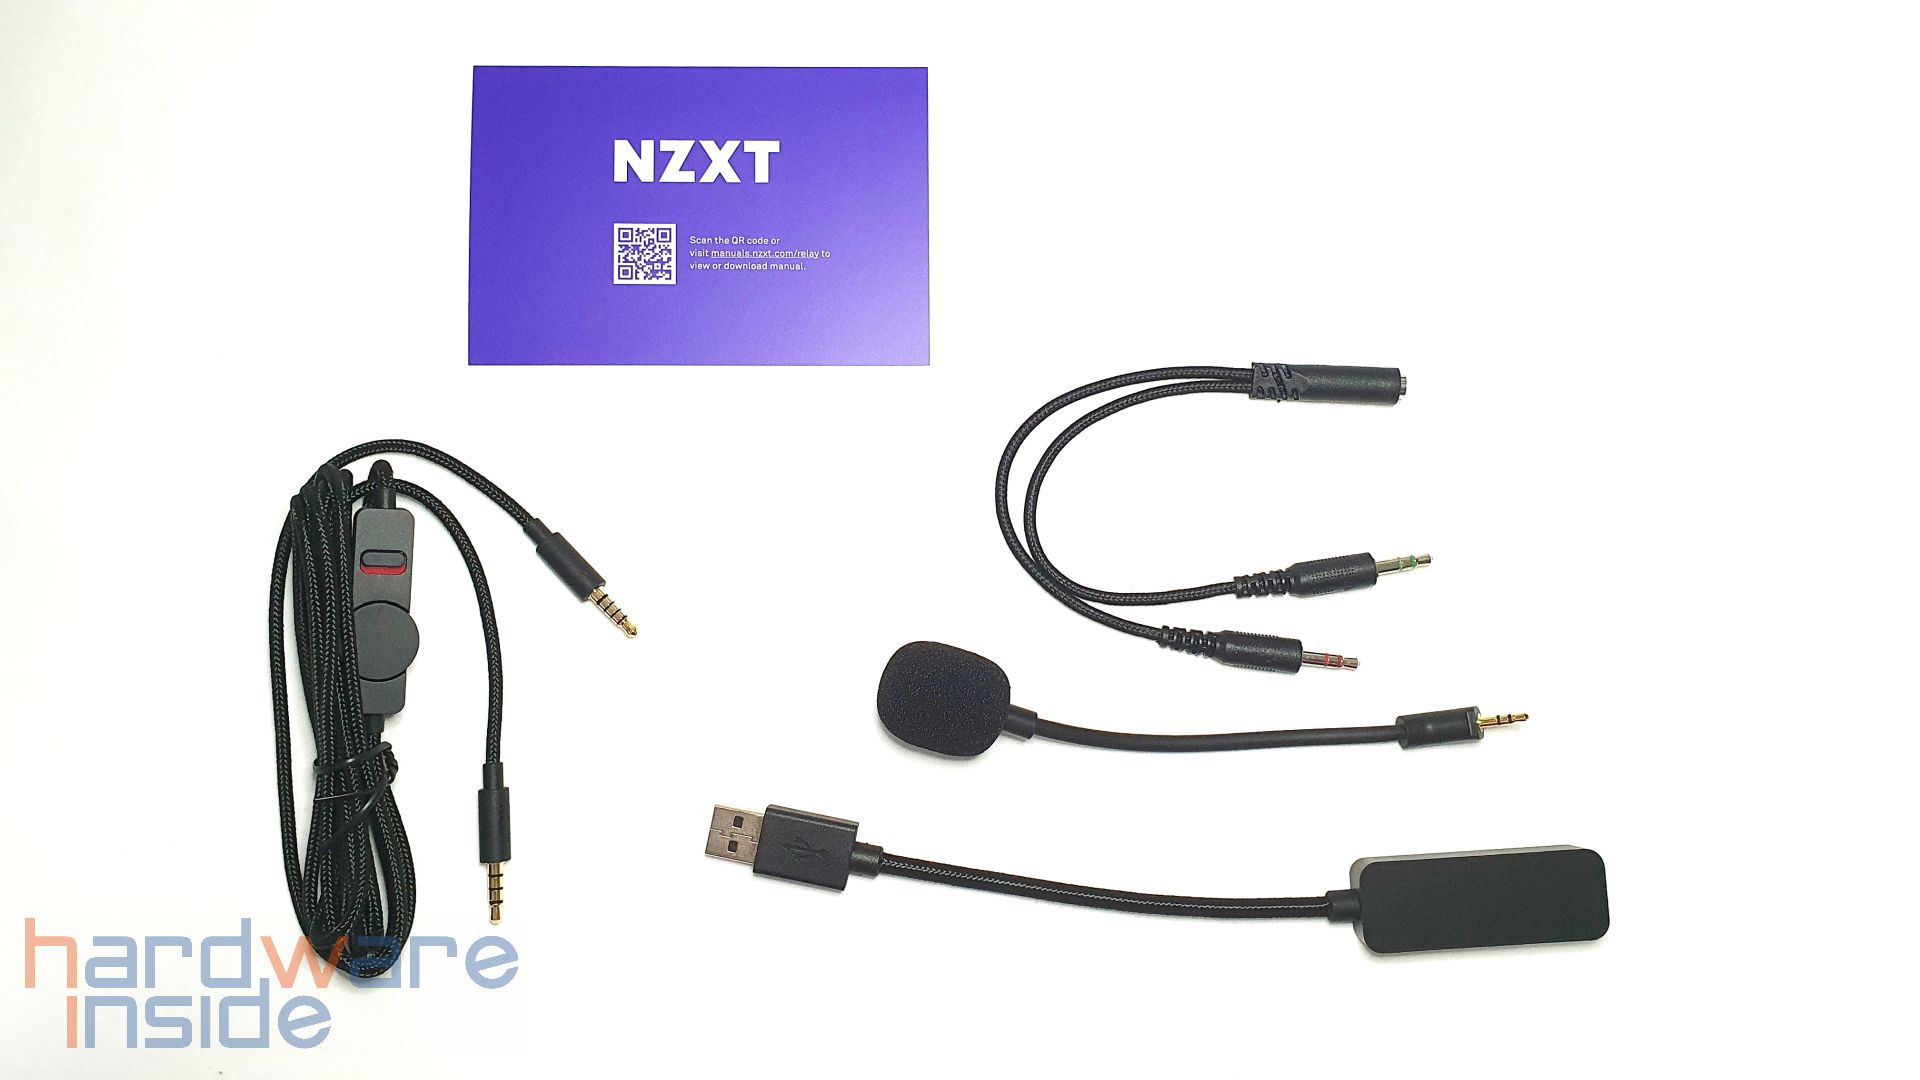 NZXT RELAY HEADSET Lieferumfang